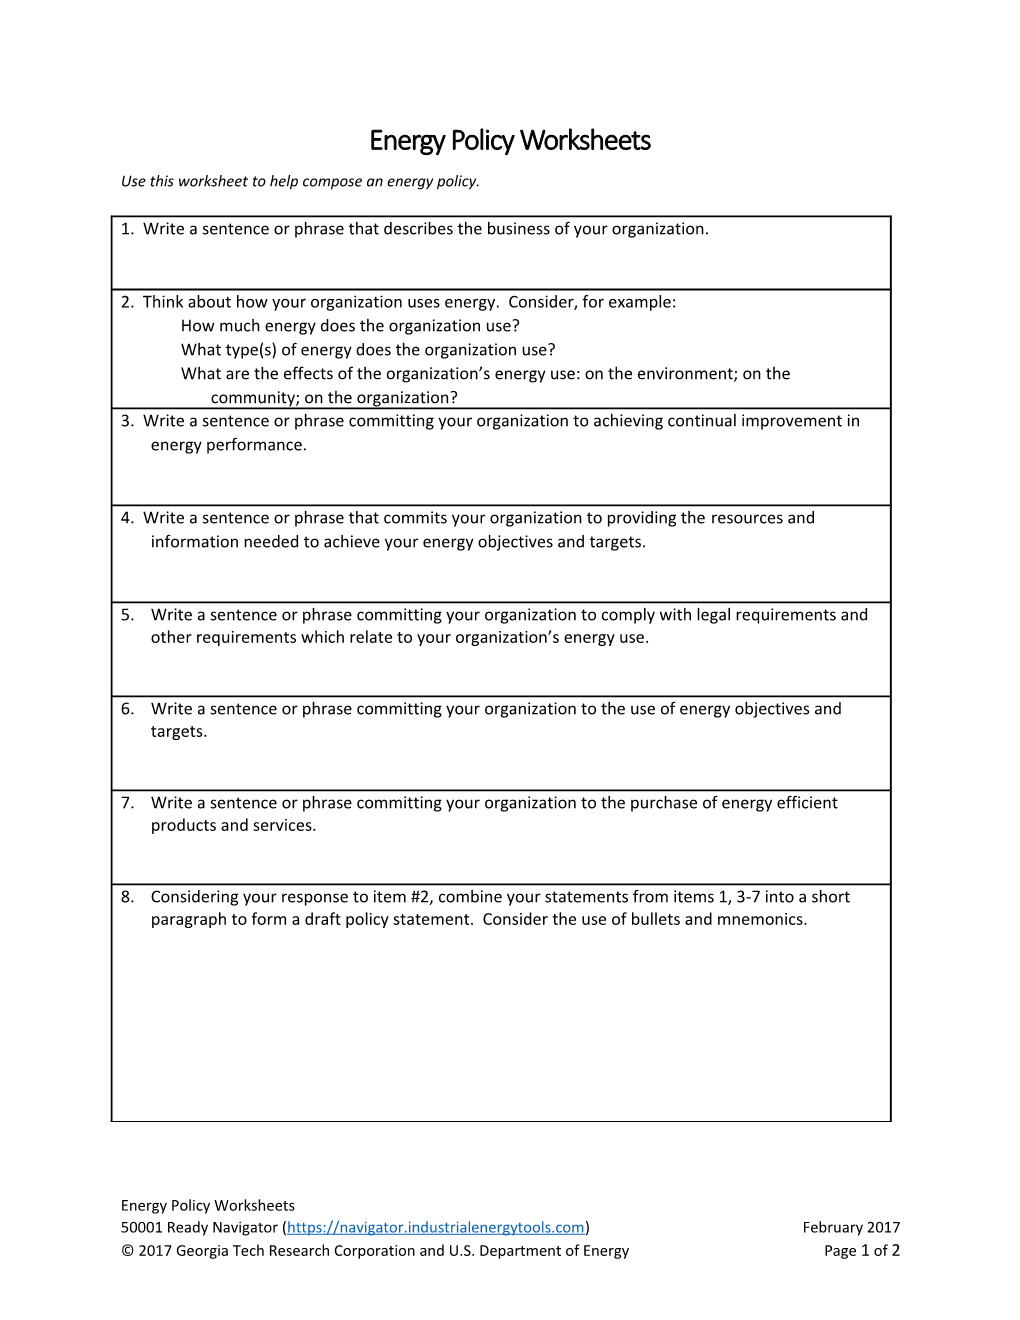 Use This Worksheet to Help Compose an Energy Policy